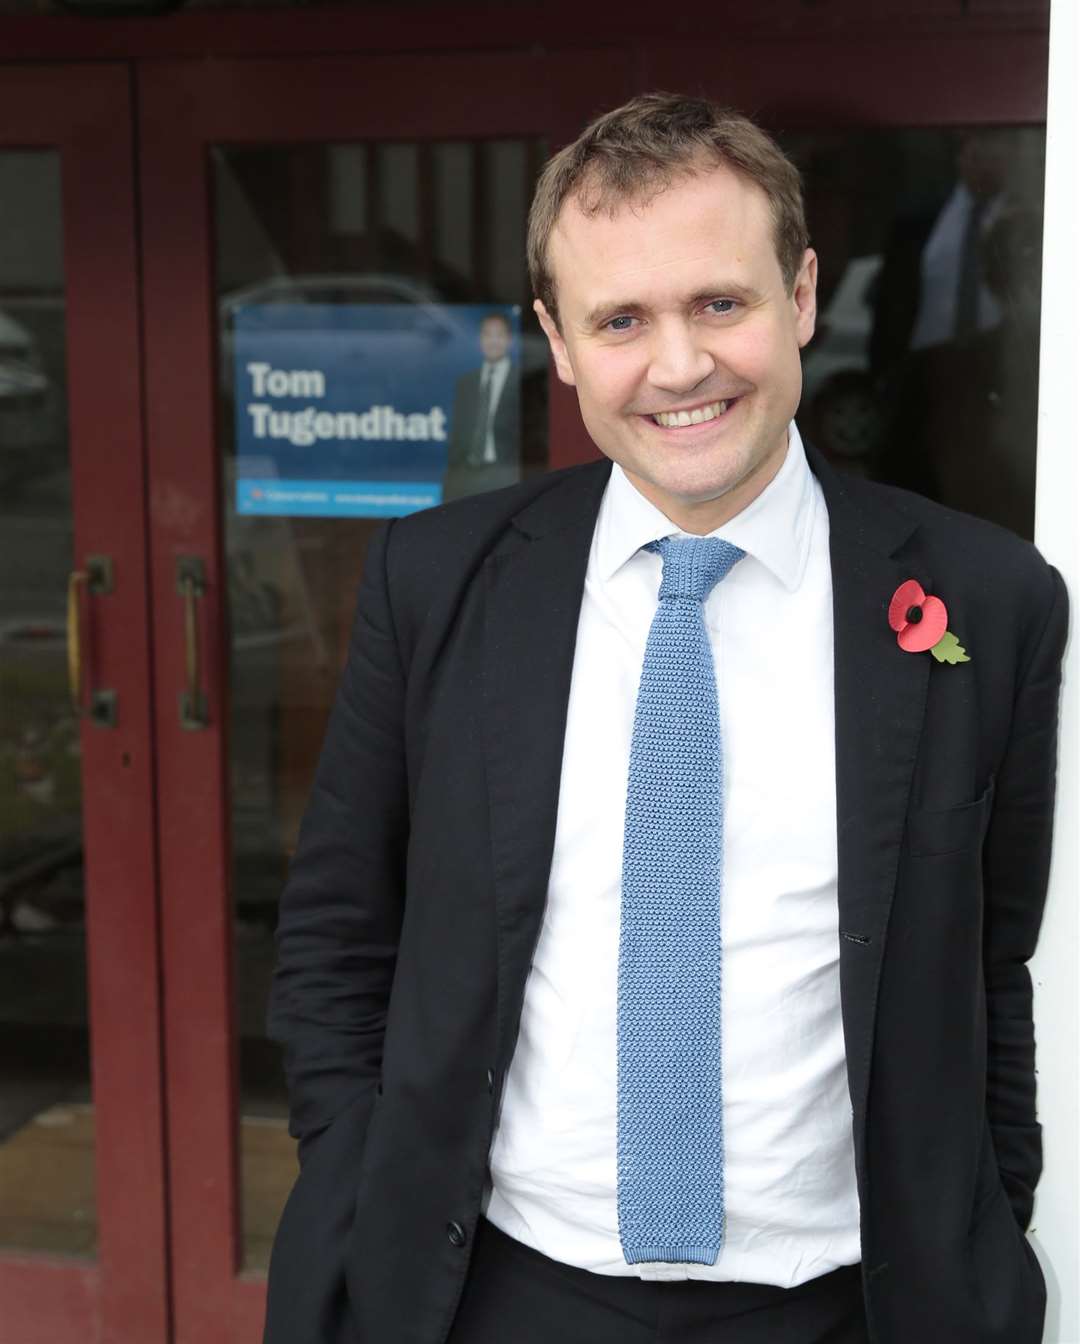 MP Tom Tugendhat. Picture: Martin Apps